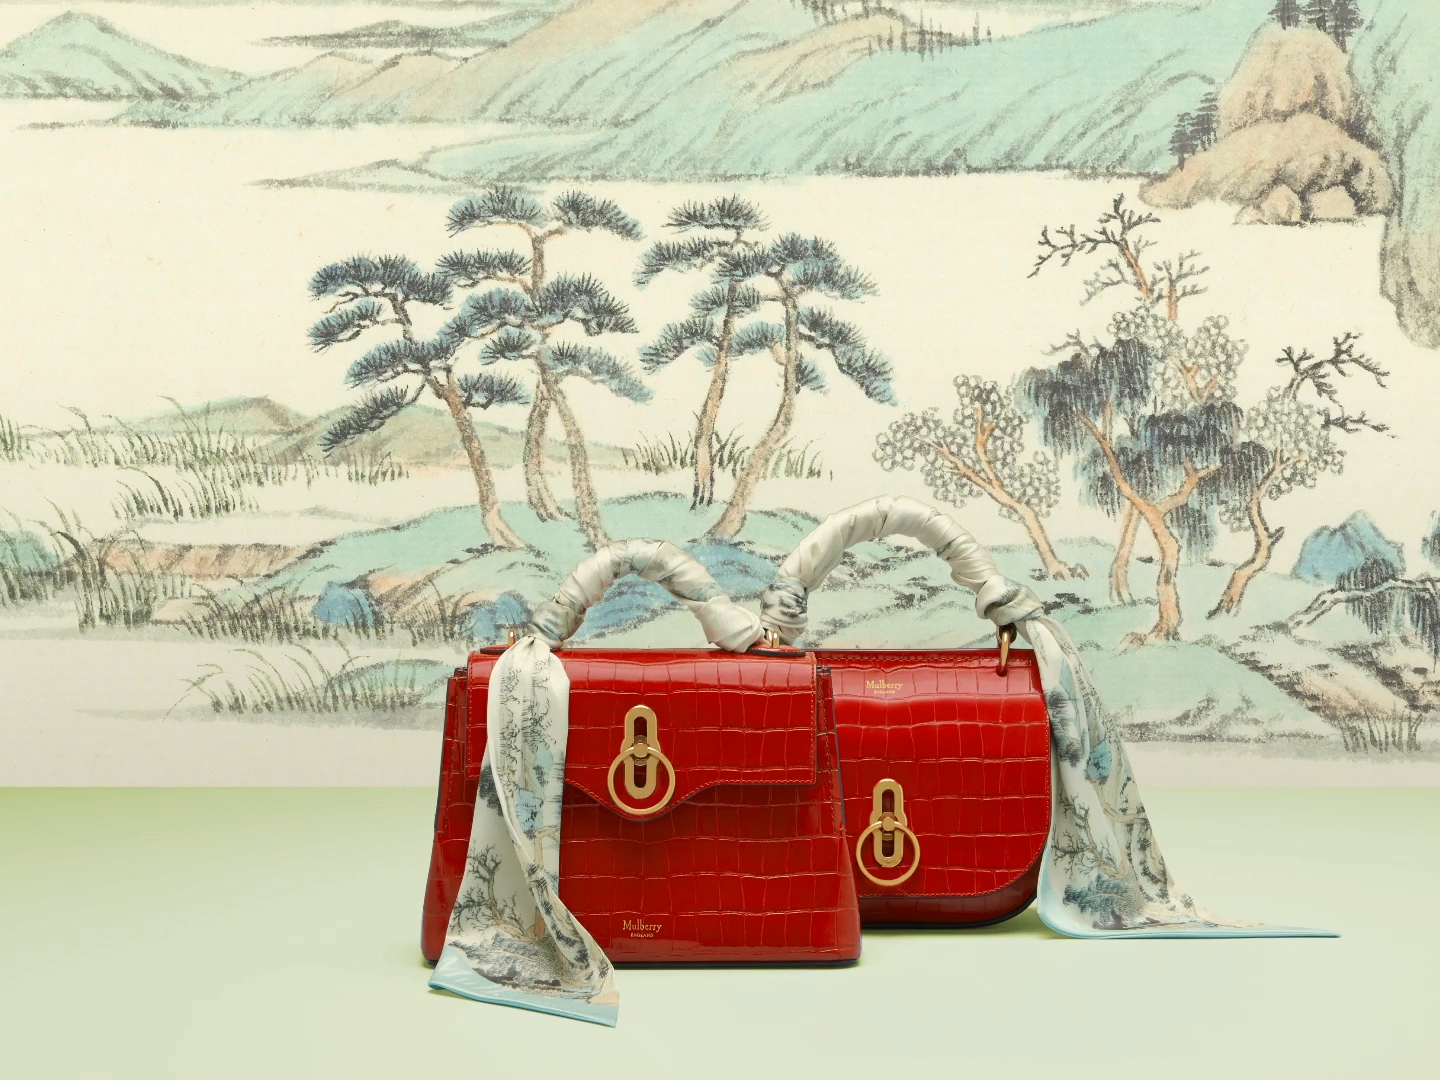 Mulberry 2019 Chinese New Year edition bags